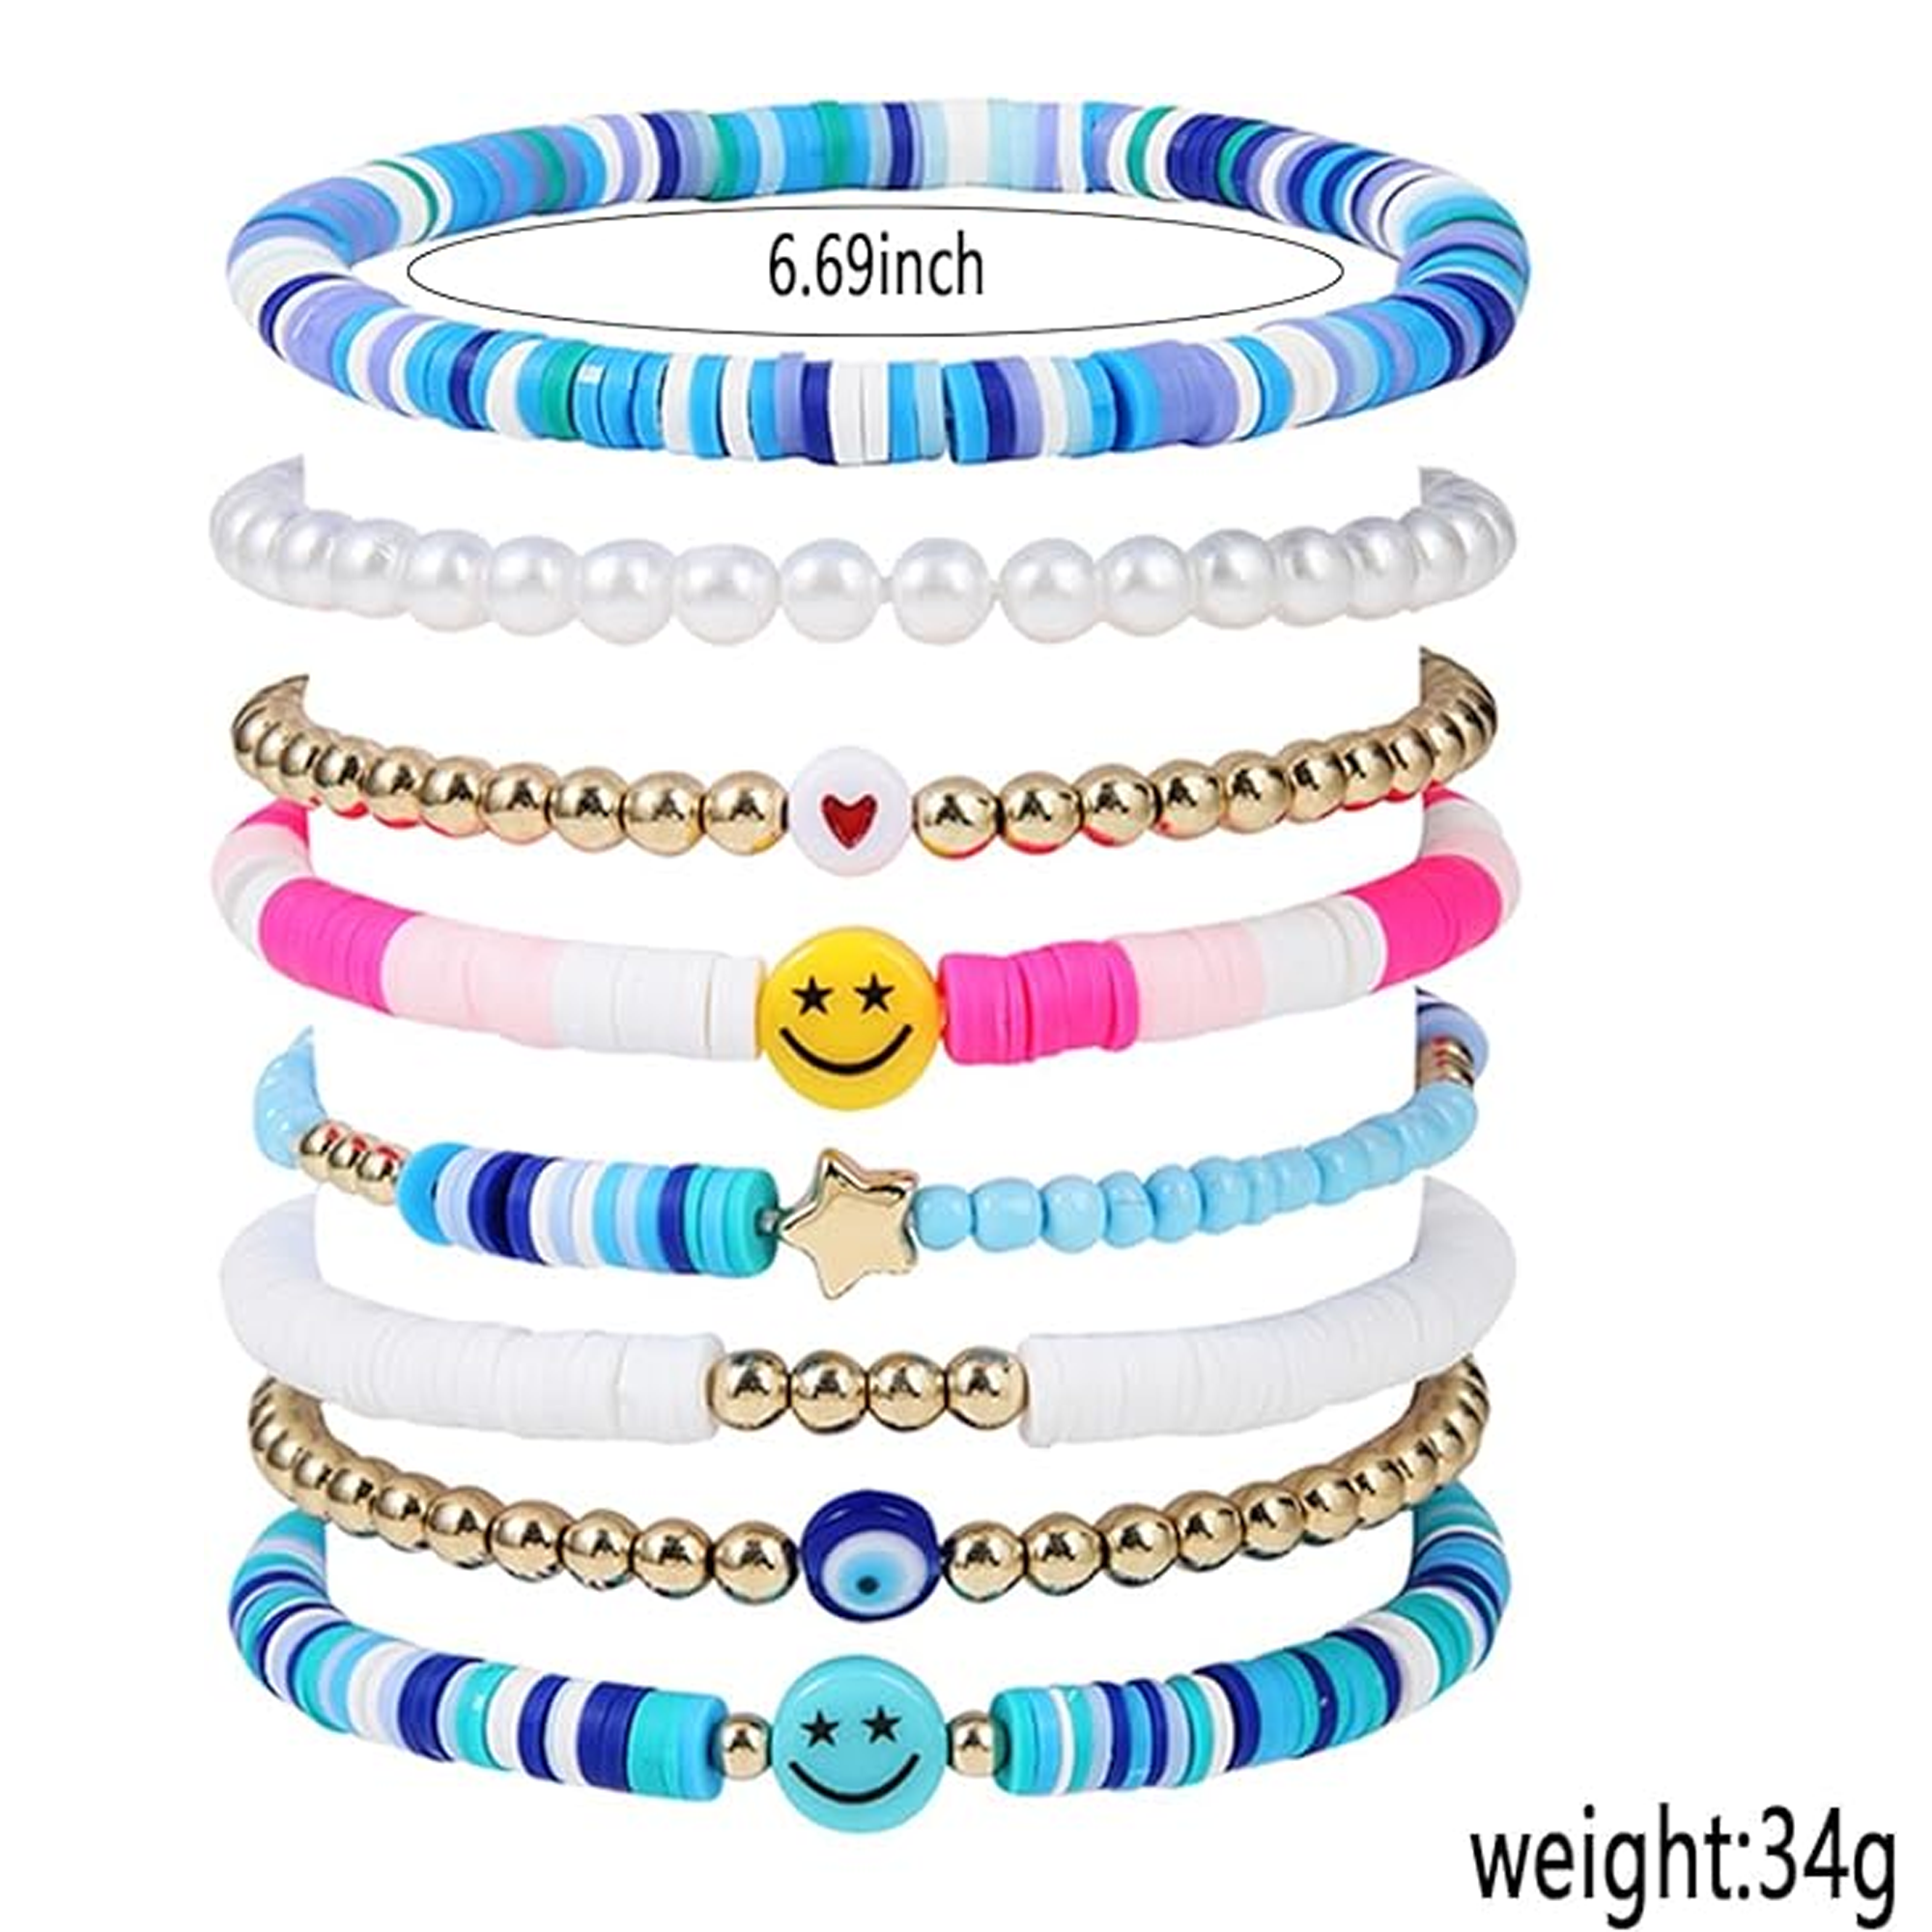 12pcs Fruit Clay Bracelets, Colorful Surfer Disc Beaded Stretch Rope  Bracelet For Girls Kids, Friendship Elastic Boho Women Child Play Jewelry  Charms